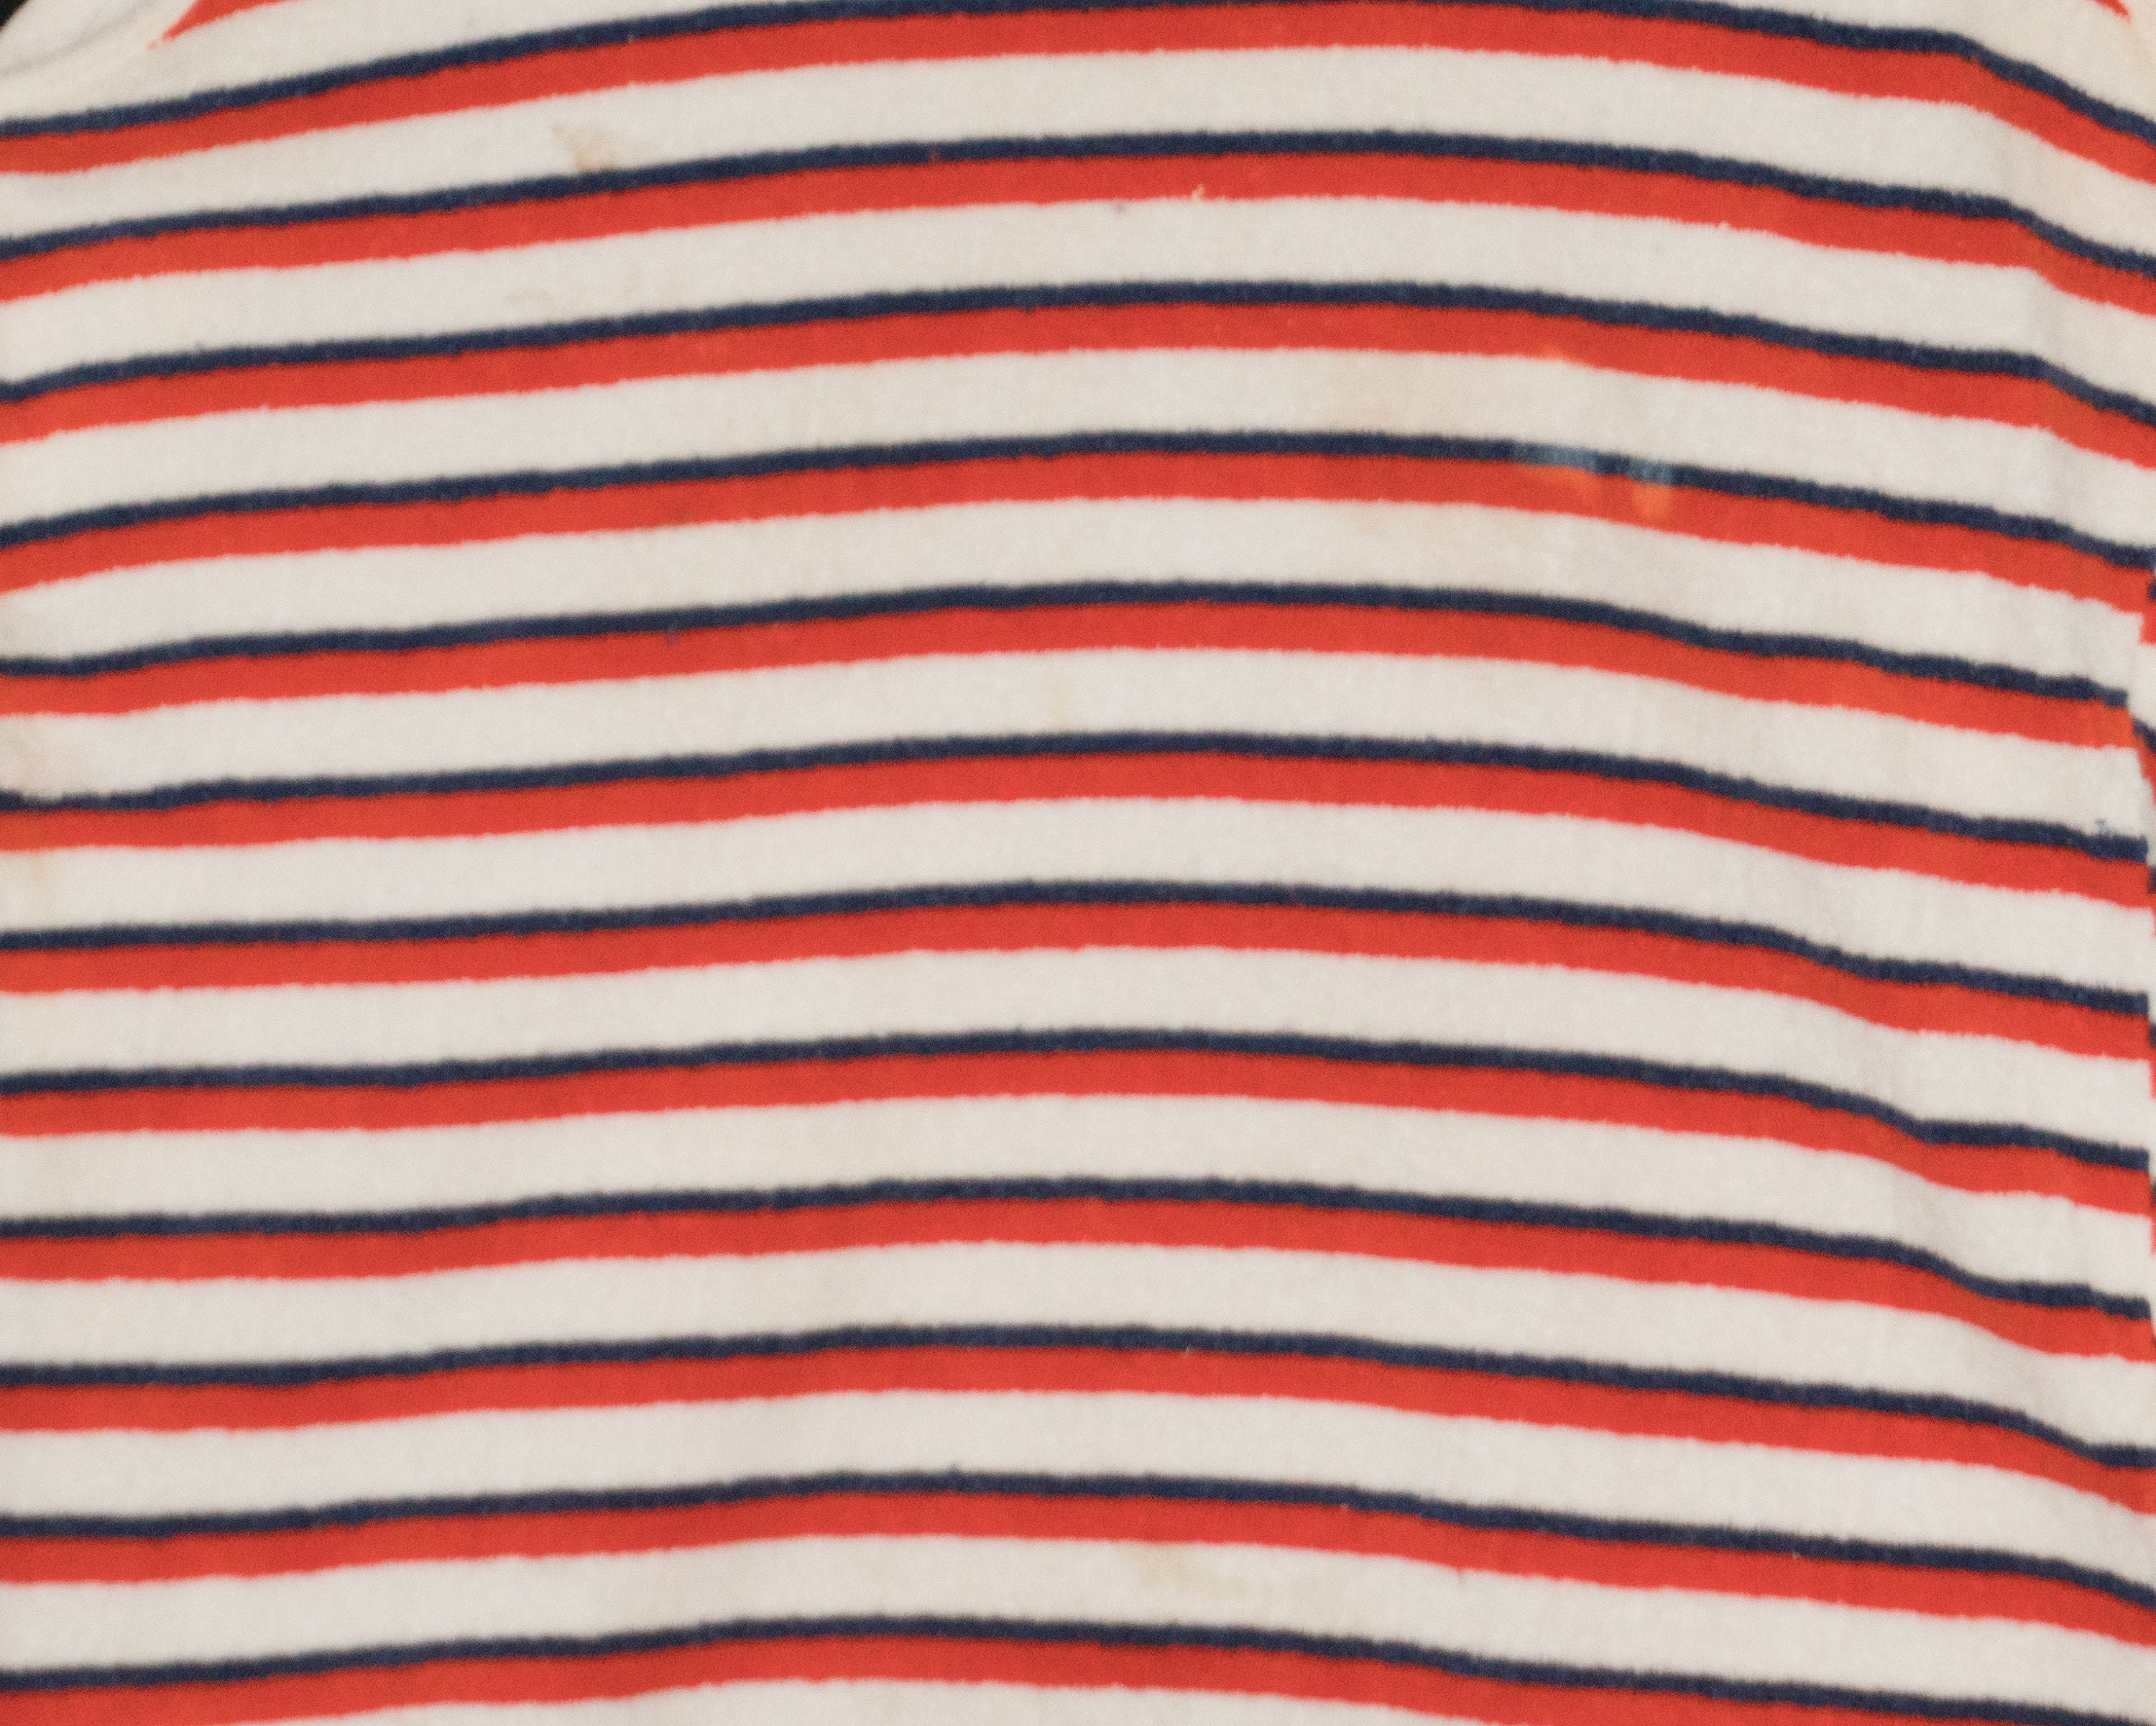 Vintage Red White Blue Striped Terry Cloth Tank Top X-small - Etsy